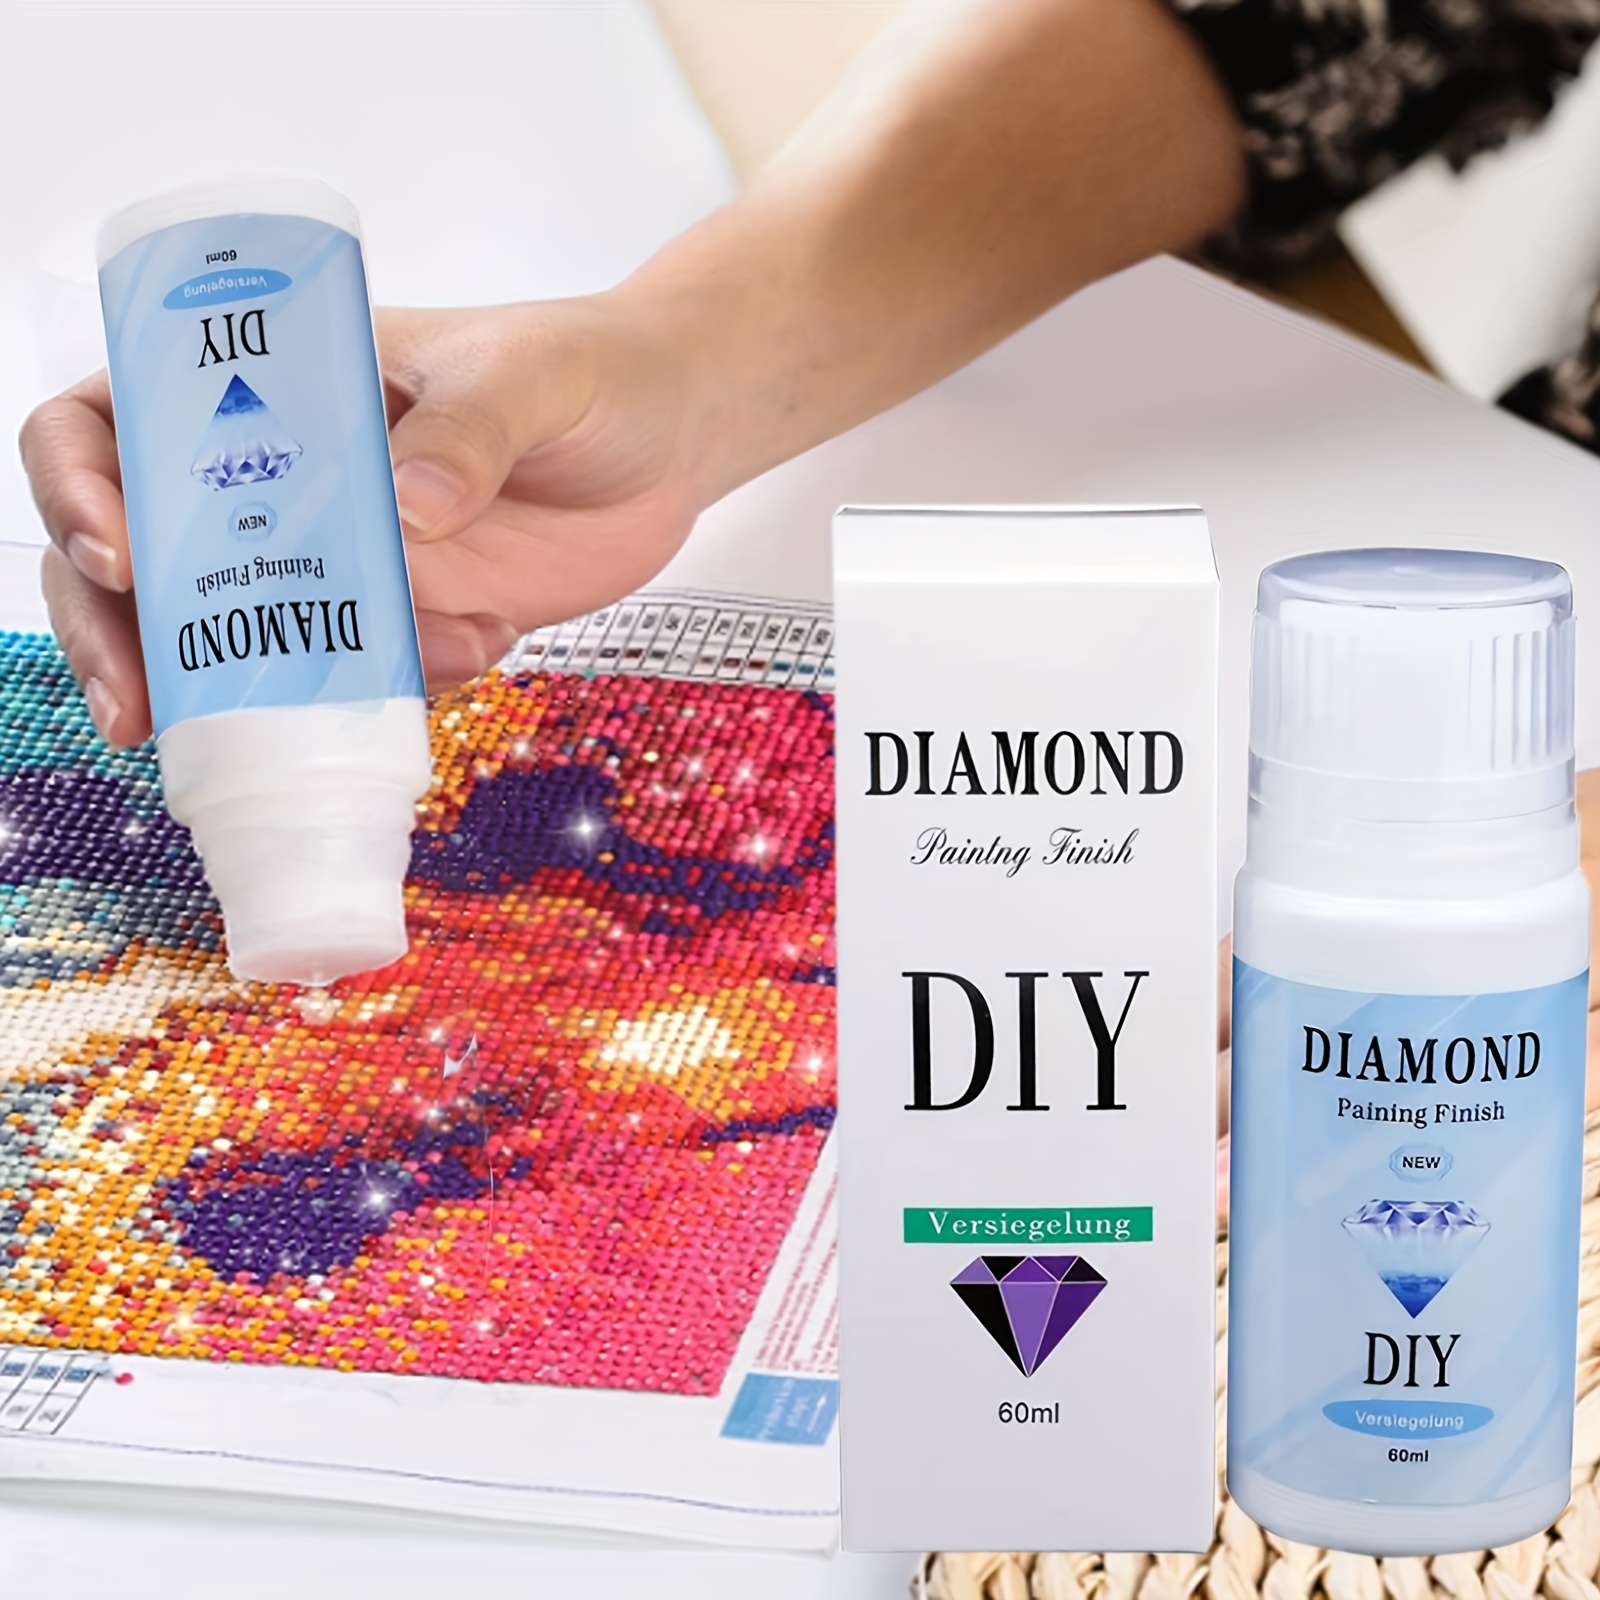 ViVijooy 1 Pack (120ml) Diamond Painting Sealer Kits,5D Diamond Painting Glue with Brushes Permanent Hold & Shine Accessories